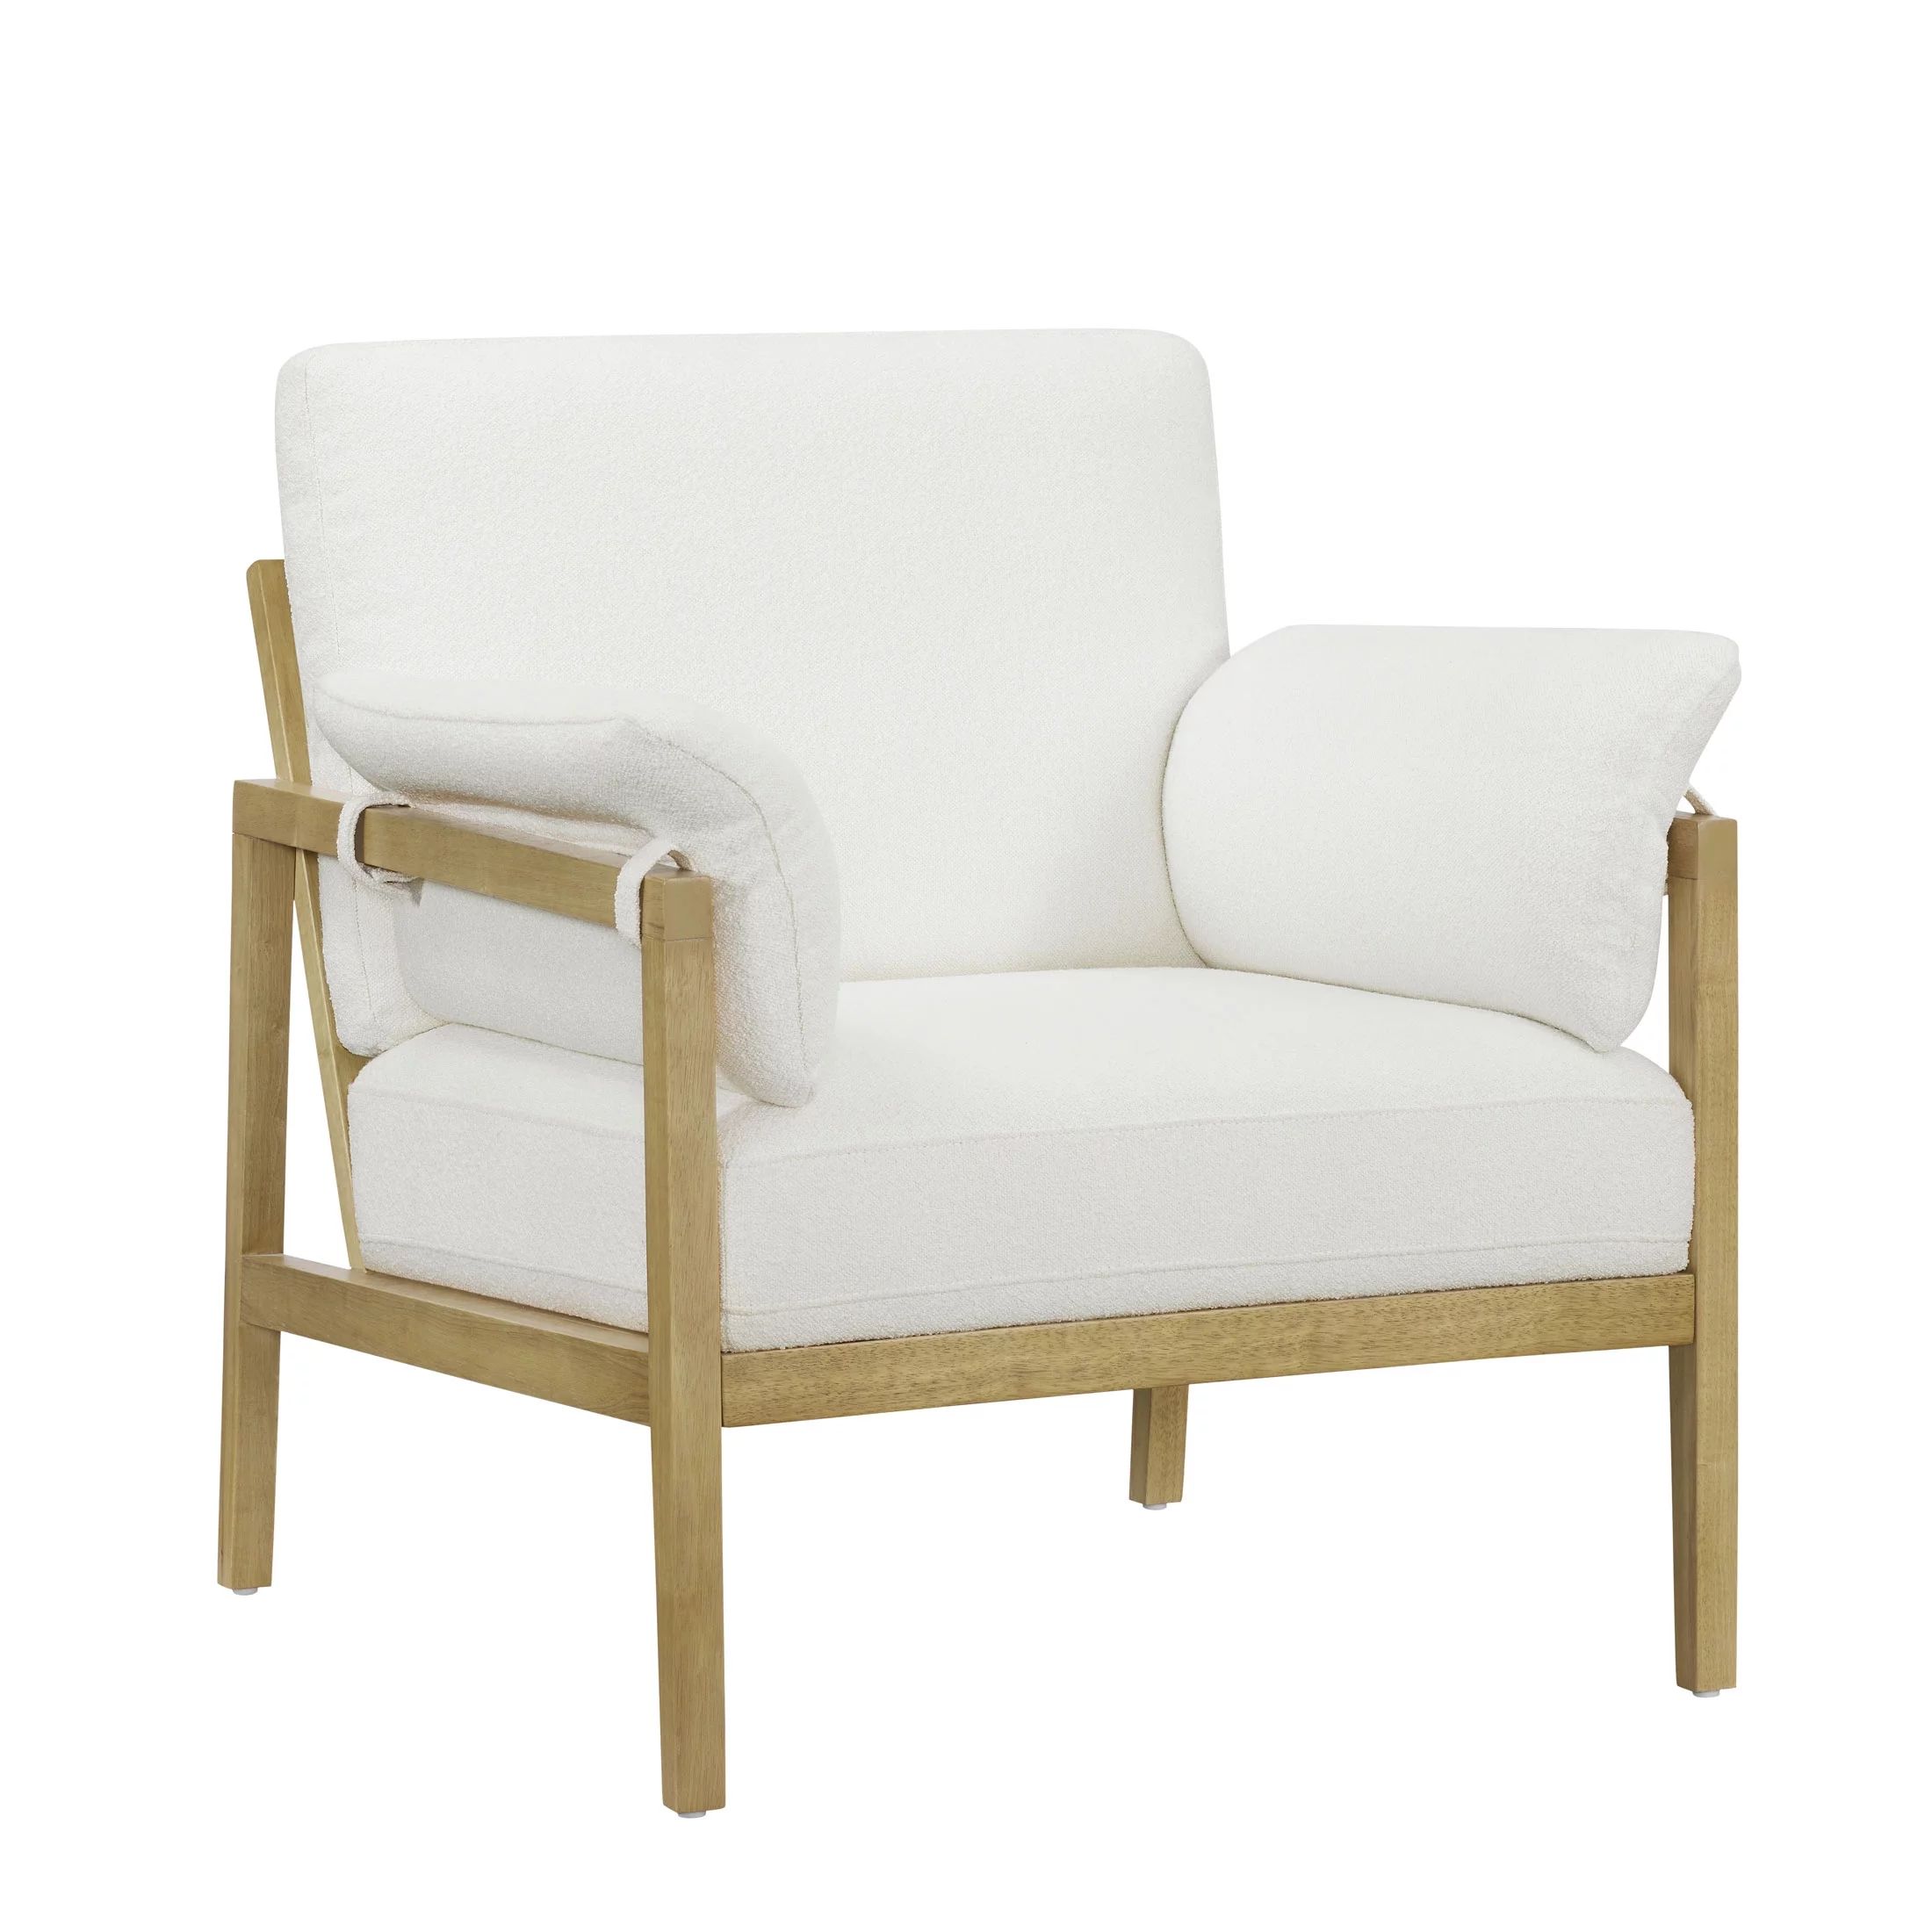 Beautiful Wrap Me Up Accent Chair with Removable Cushions by Drew, Cream | Walmart (US)